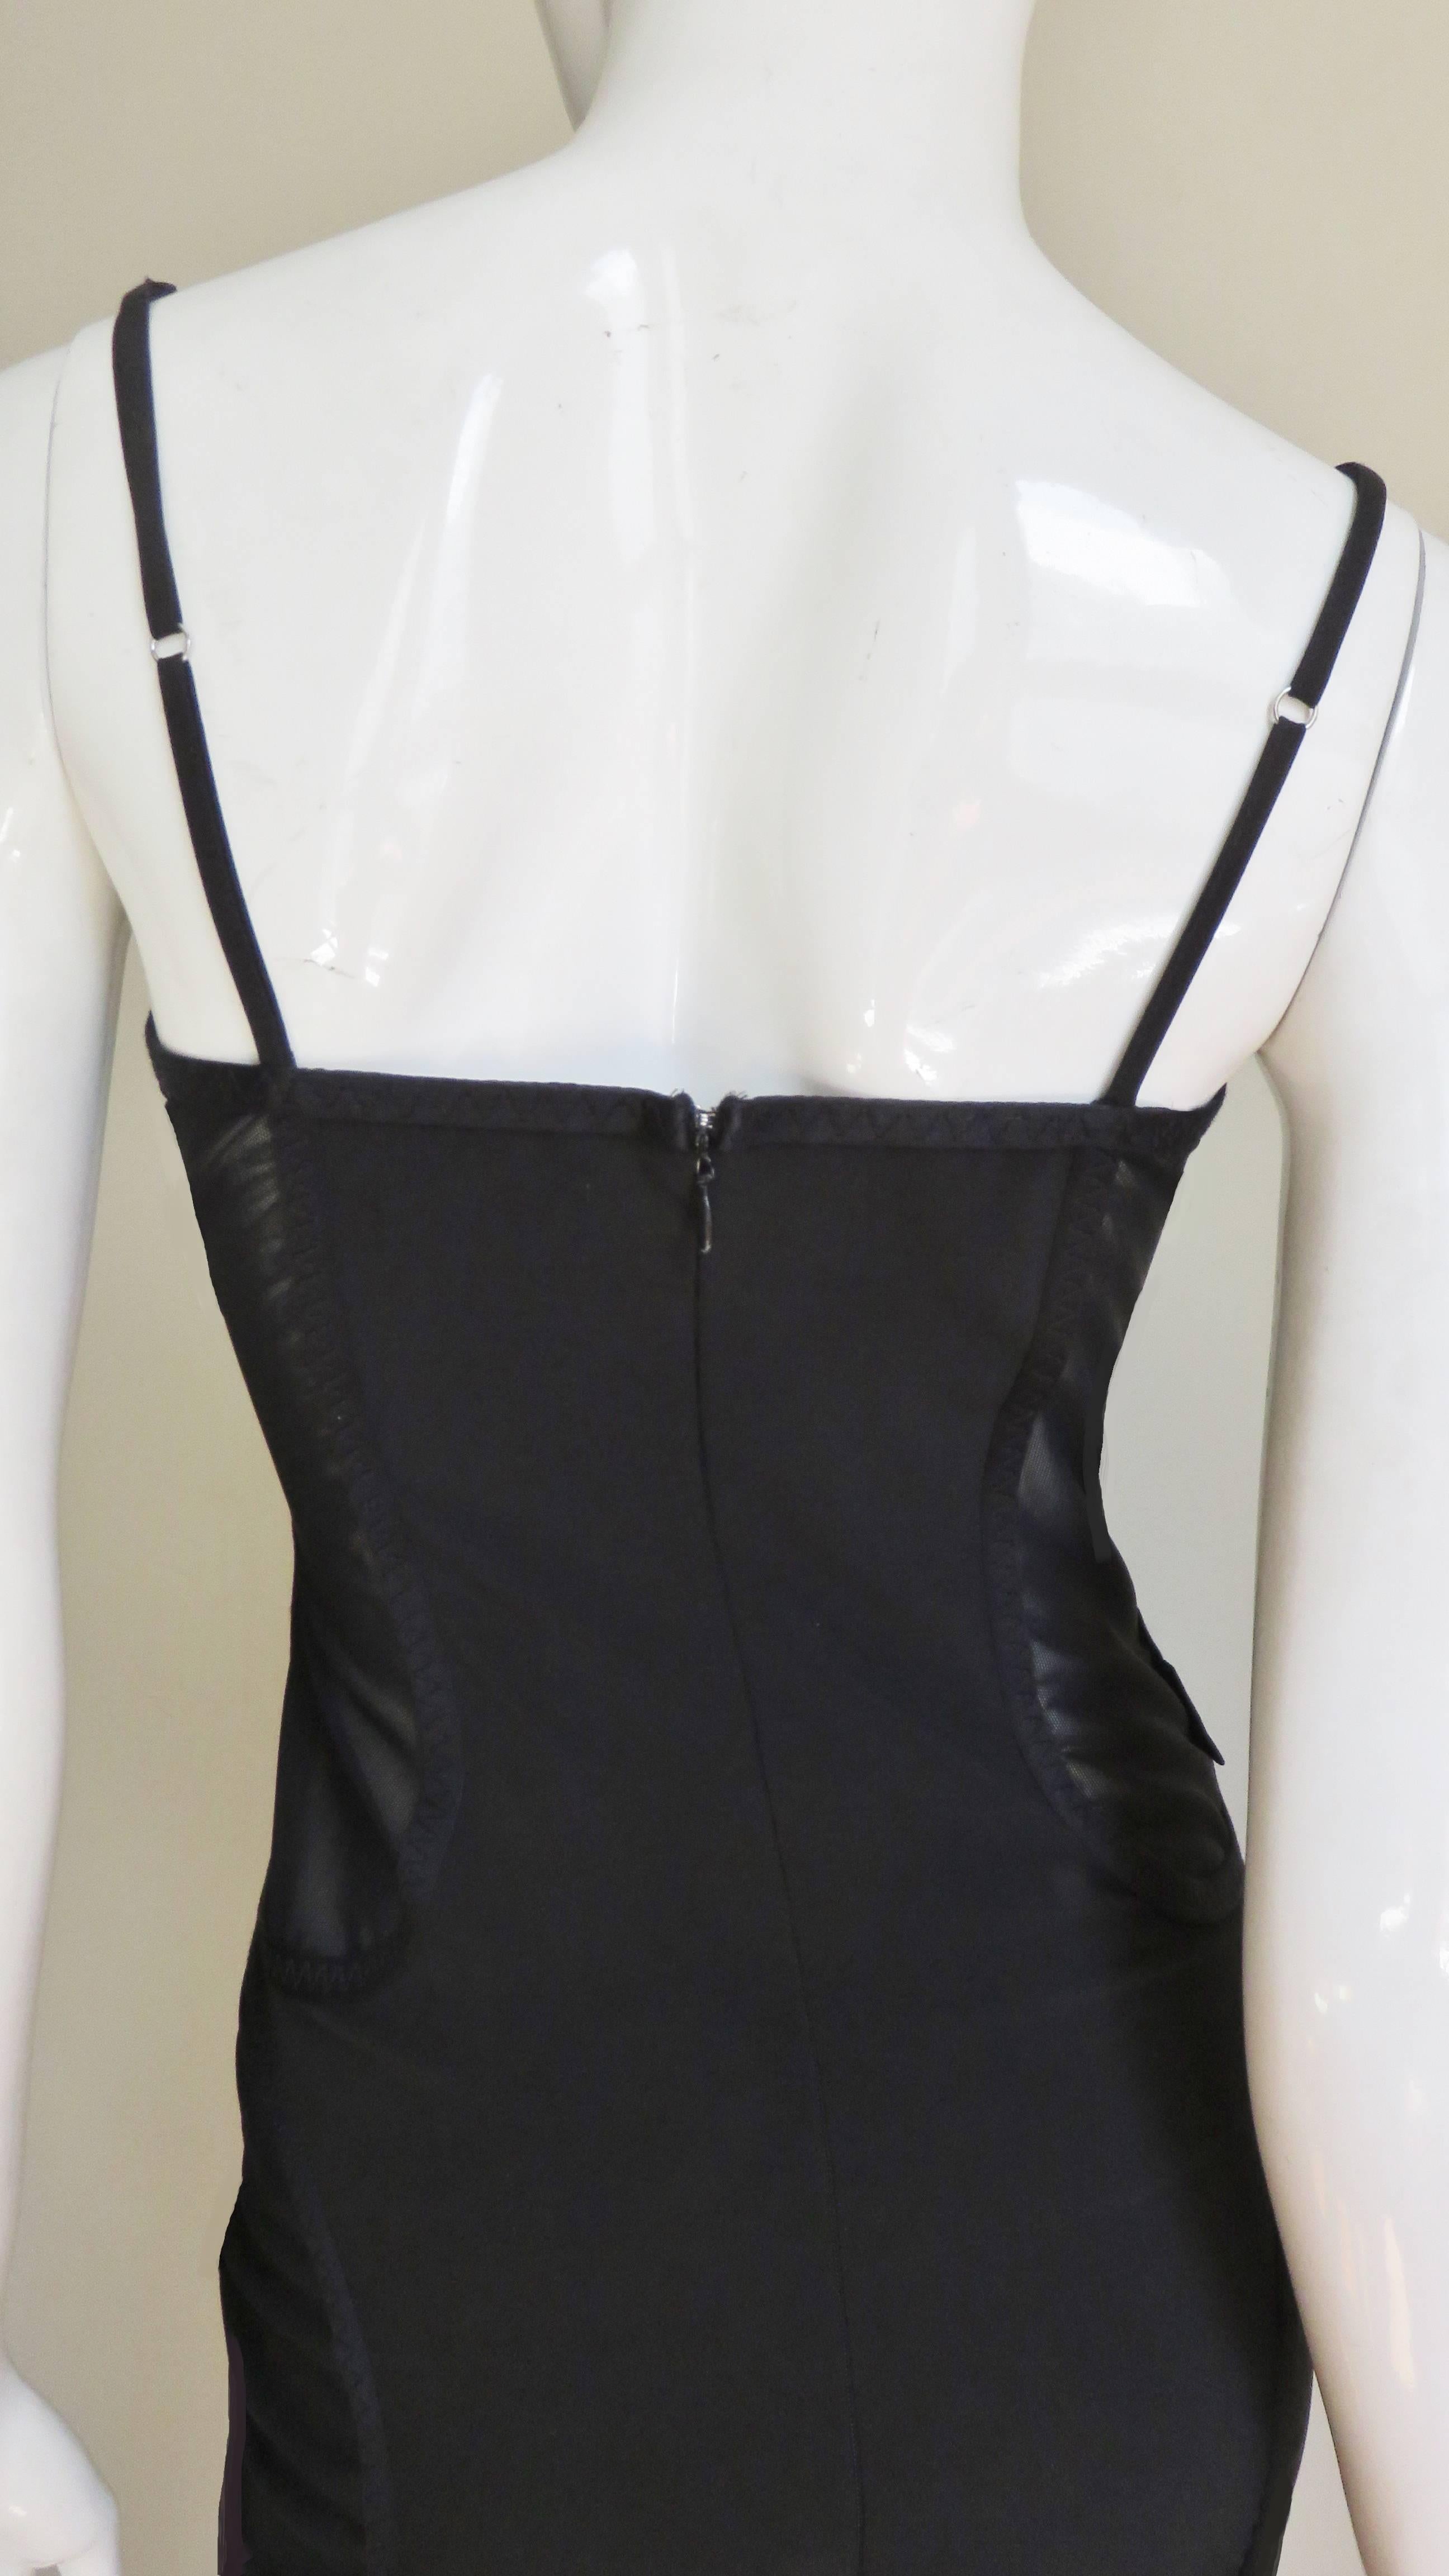 Moschino Dress with Sheer Side Panels 1990s In Good Condition For Sale In Water Mill, NY